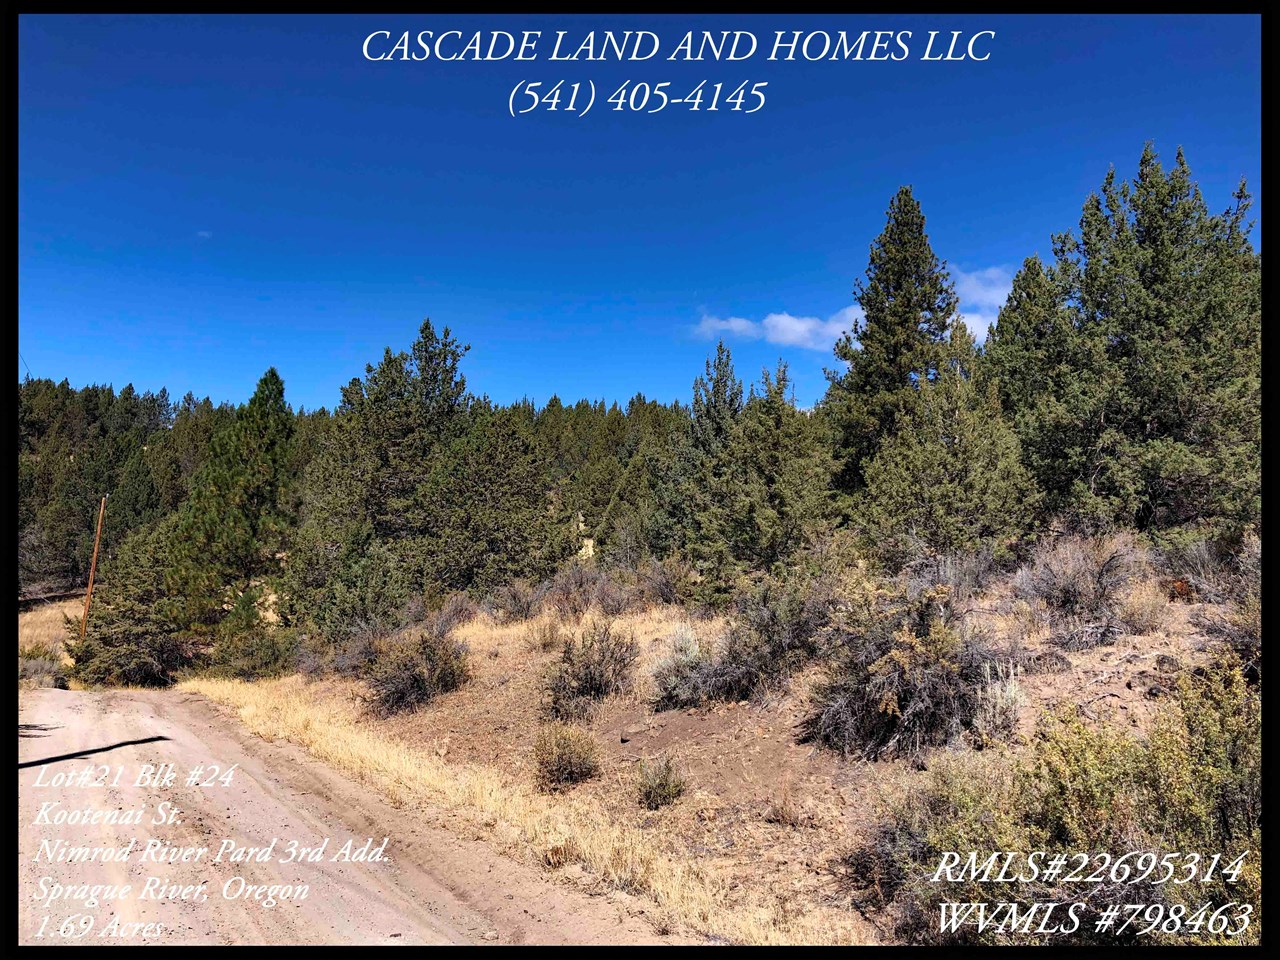 the road to the property is compacted dirt and gravel and easy to travel. we had no problem at all accessing the property. it is just a short distance from the paved, county maintained road.